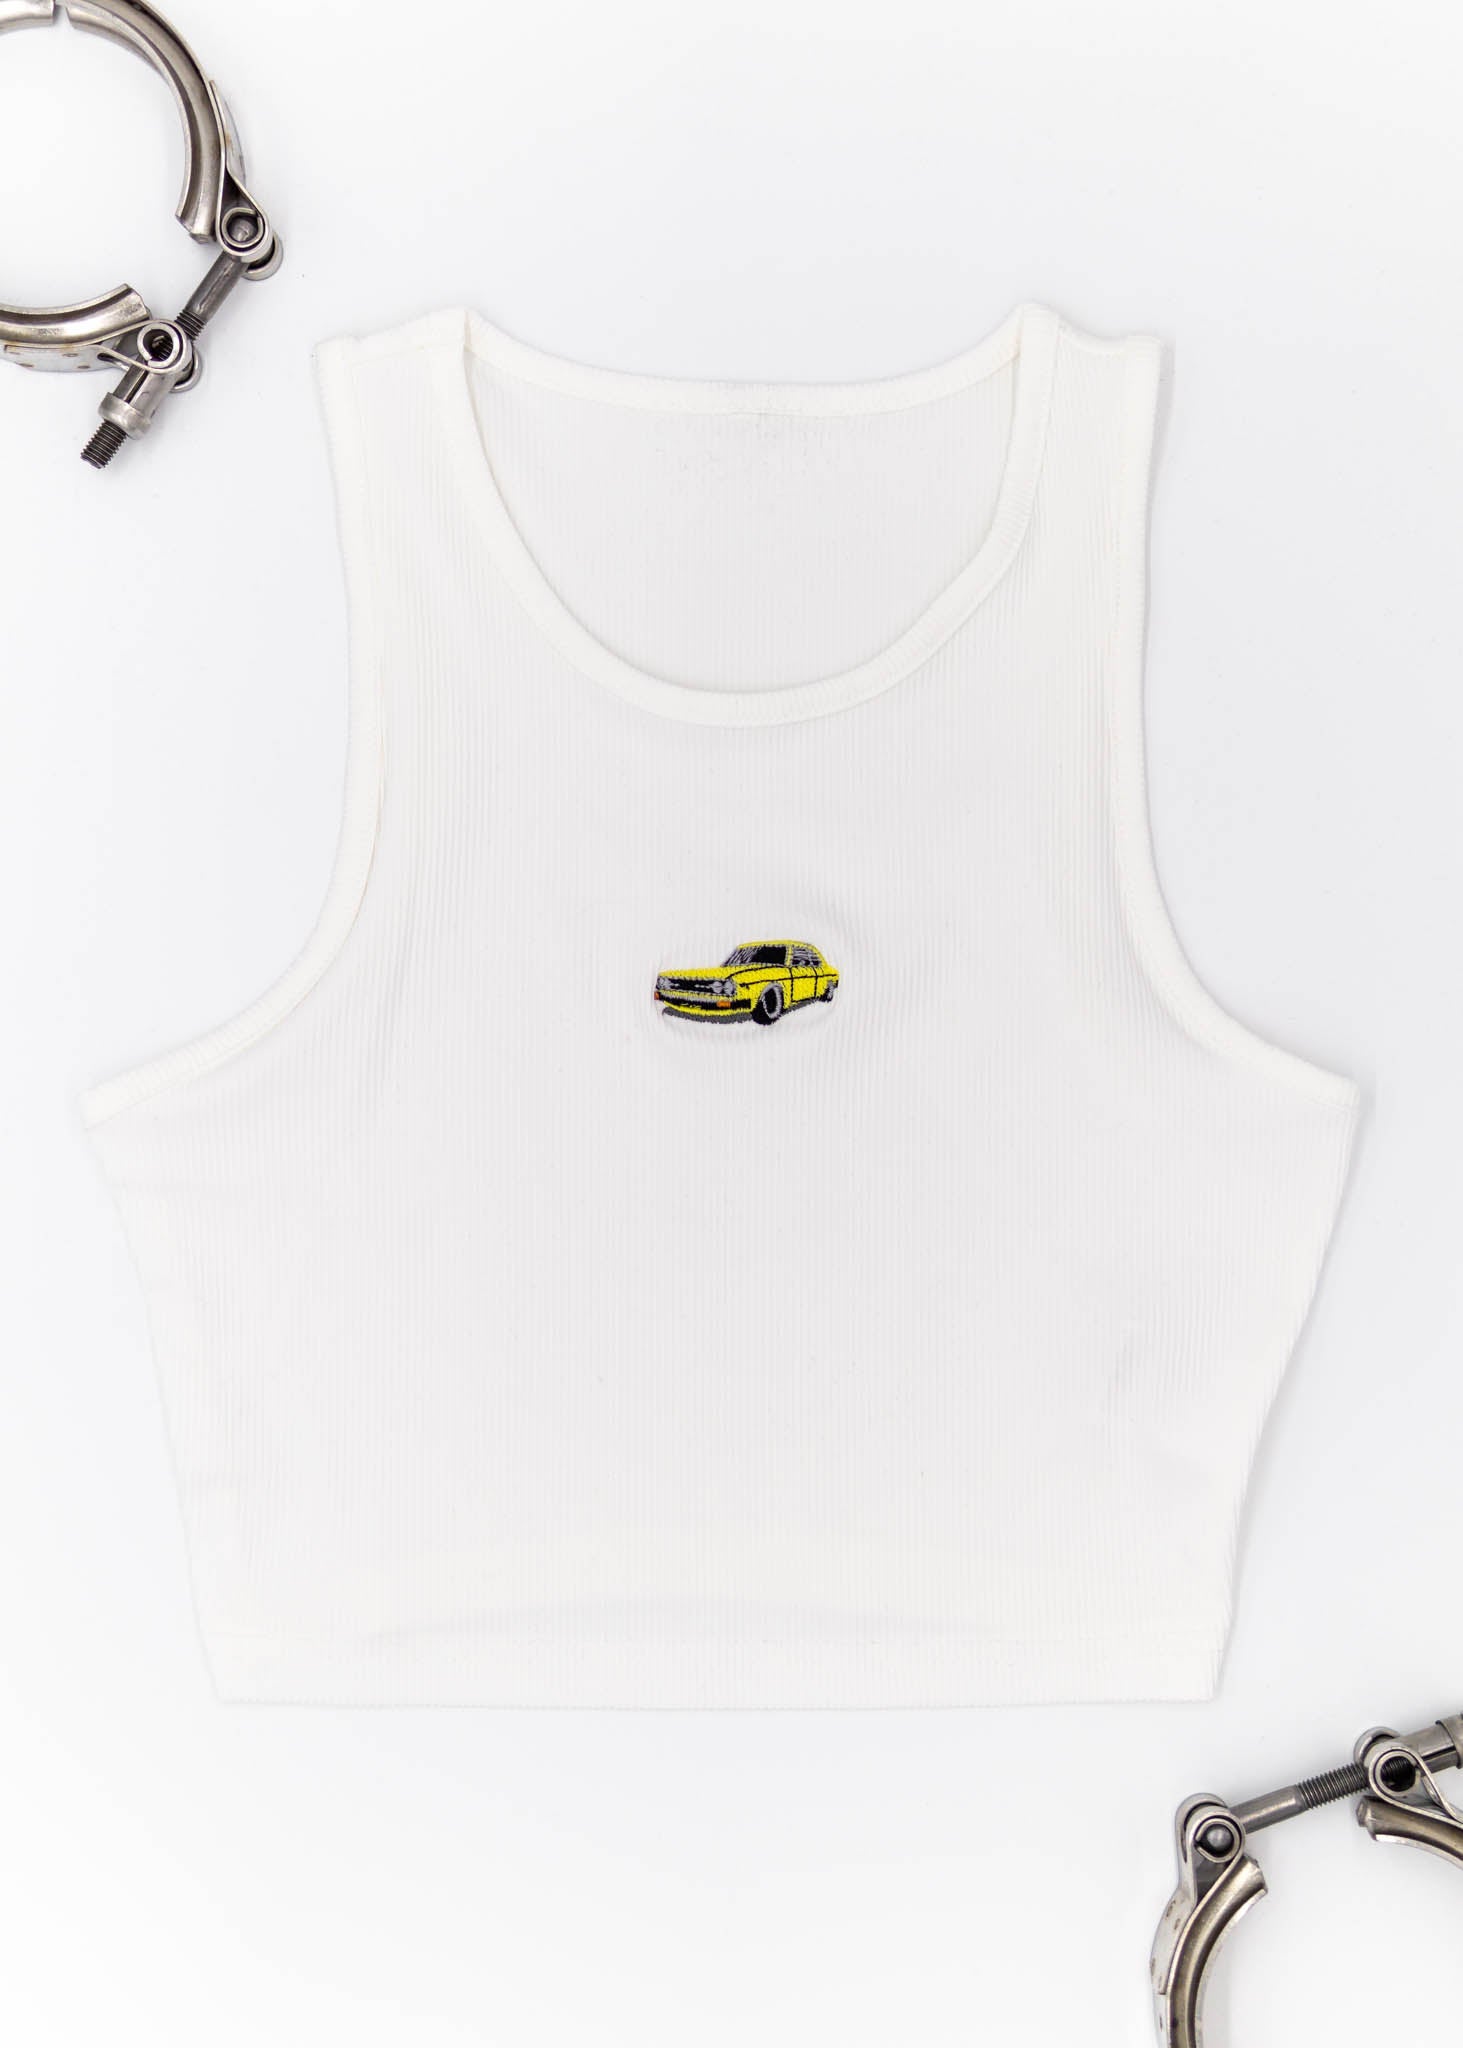    WhiteAudi100LSCropTop-Front  1463 × 2048px  A white Audi crop top for women. Photo is the front view of the top with an embroidered yellow Audi 100LS. Fabric composition is polyester, and elastine. The material is stretchy, ribbed, and non-transparent. The style of this shirt is sleeveless, with a round neckline.